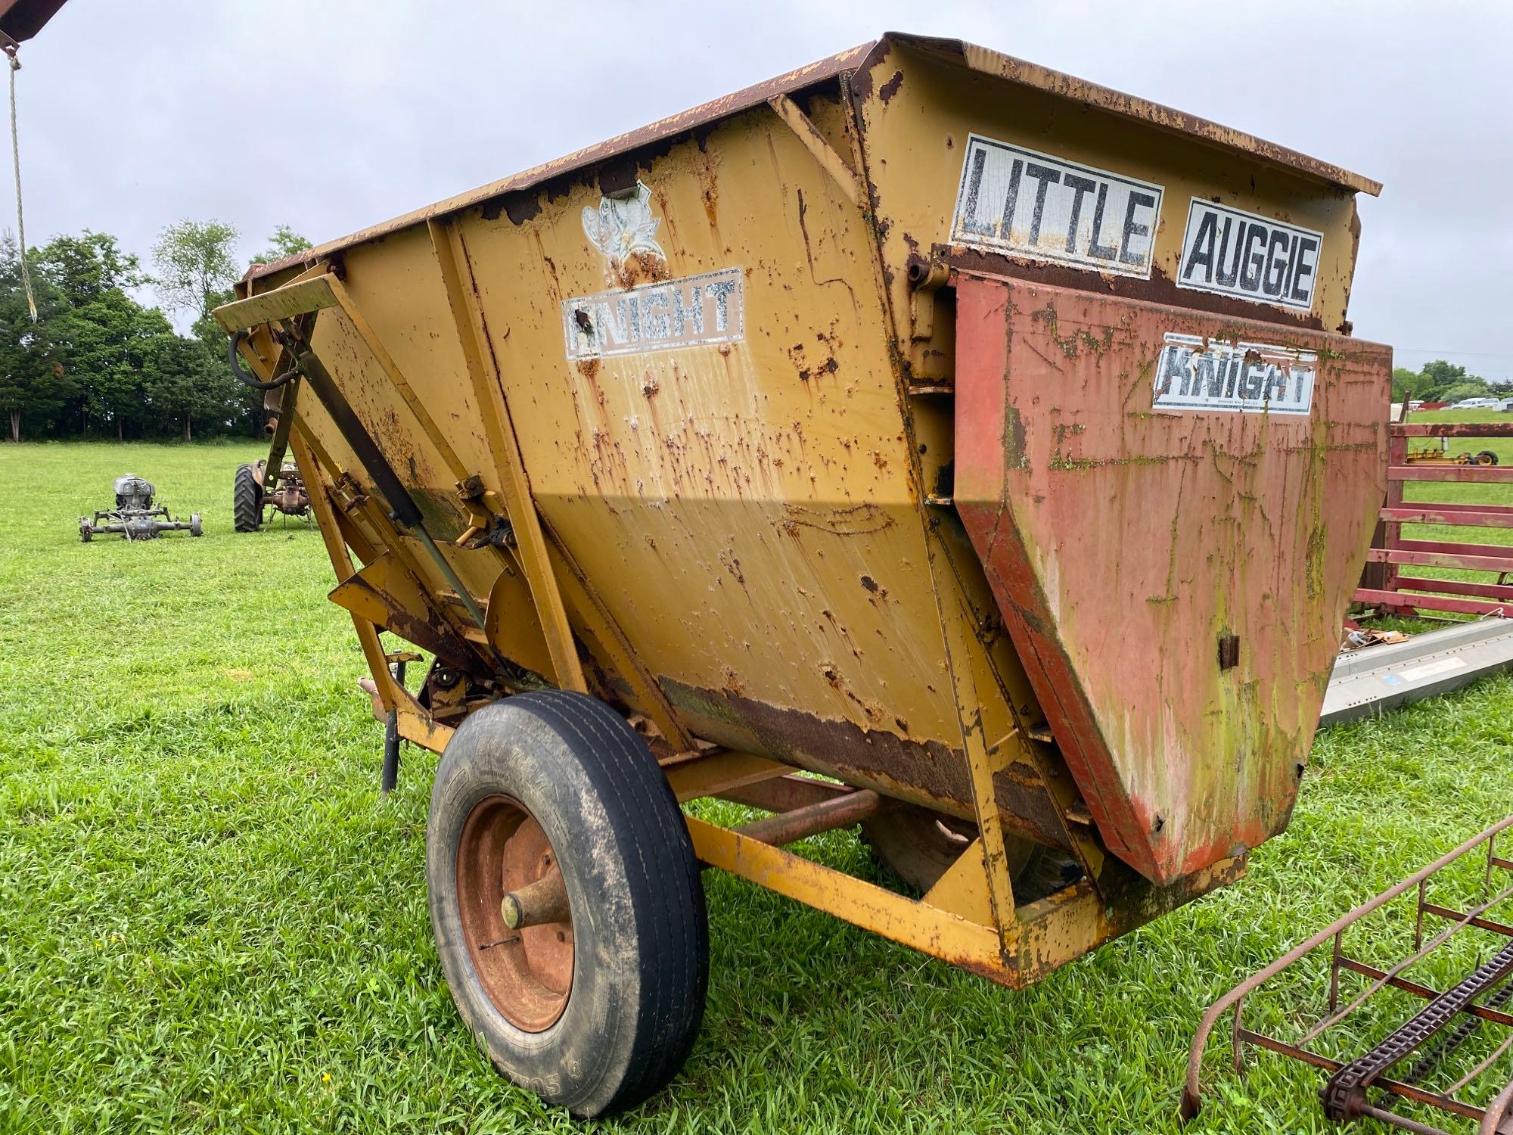 Image for Little Auggie Feed Mix Wagon, Per Seller Everything Works as it Should